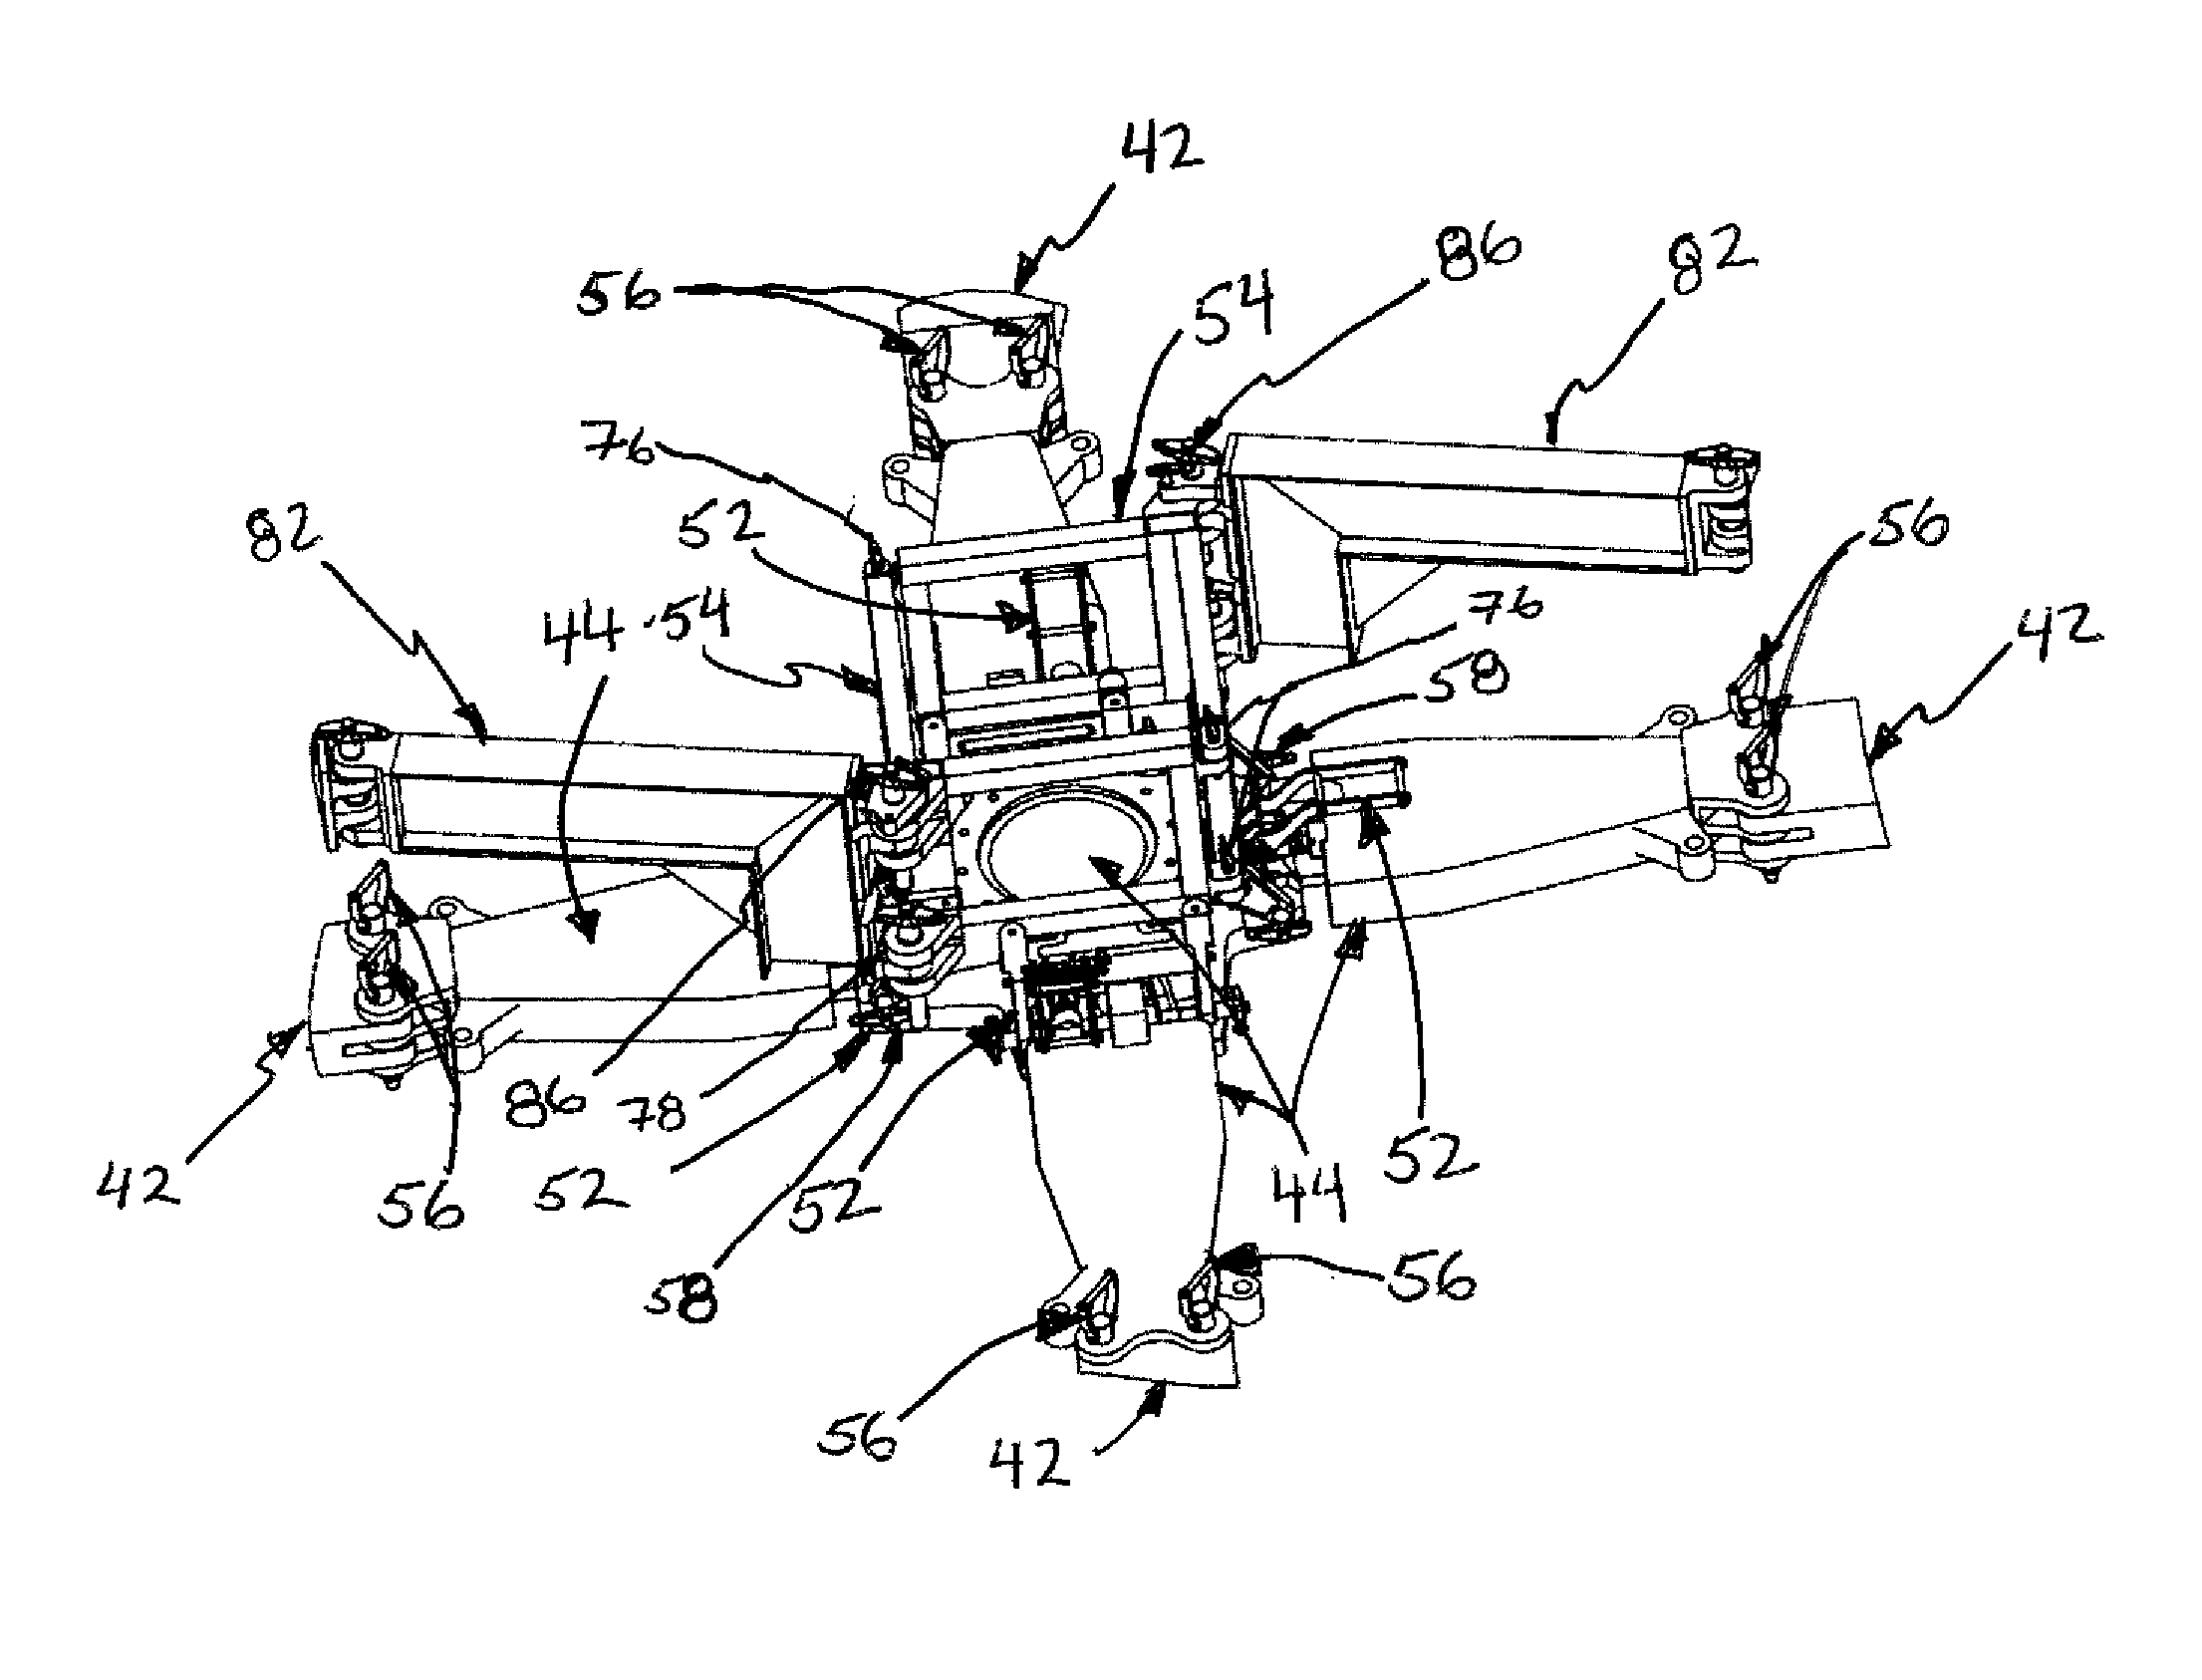 Helicopter blade folding apparatus